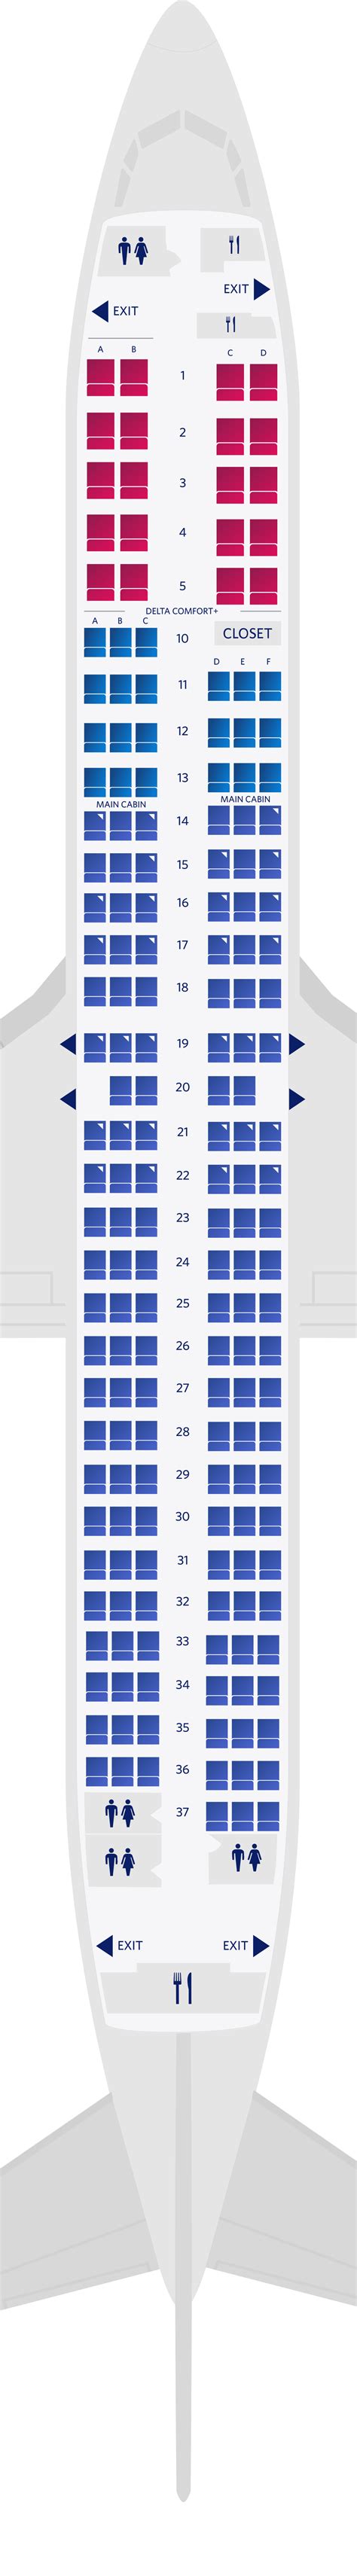 united boeing 737 900 seating chart